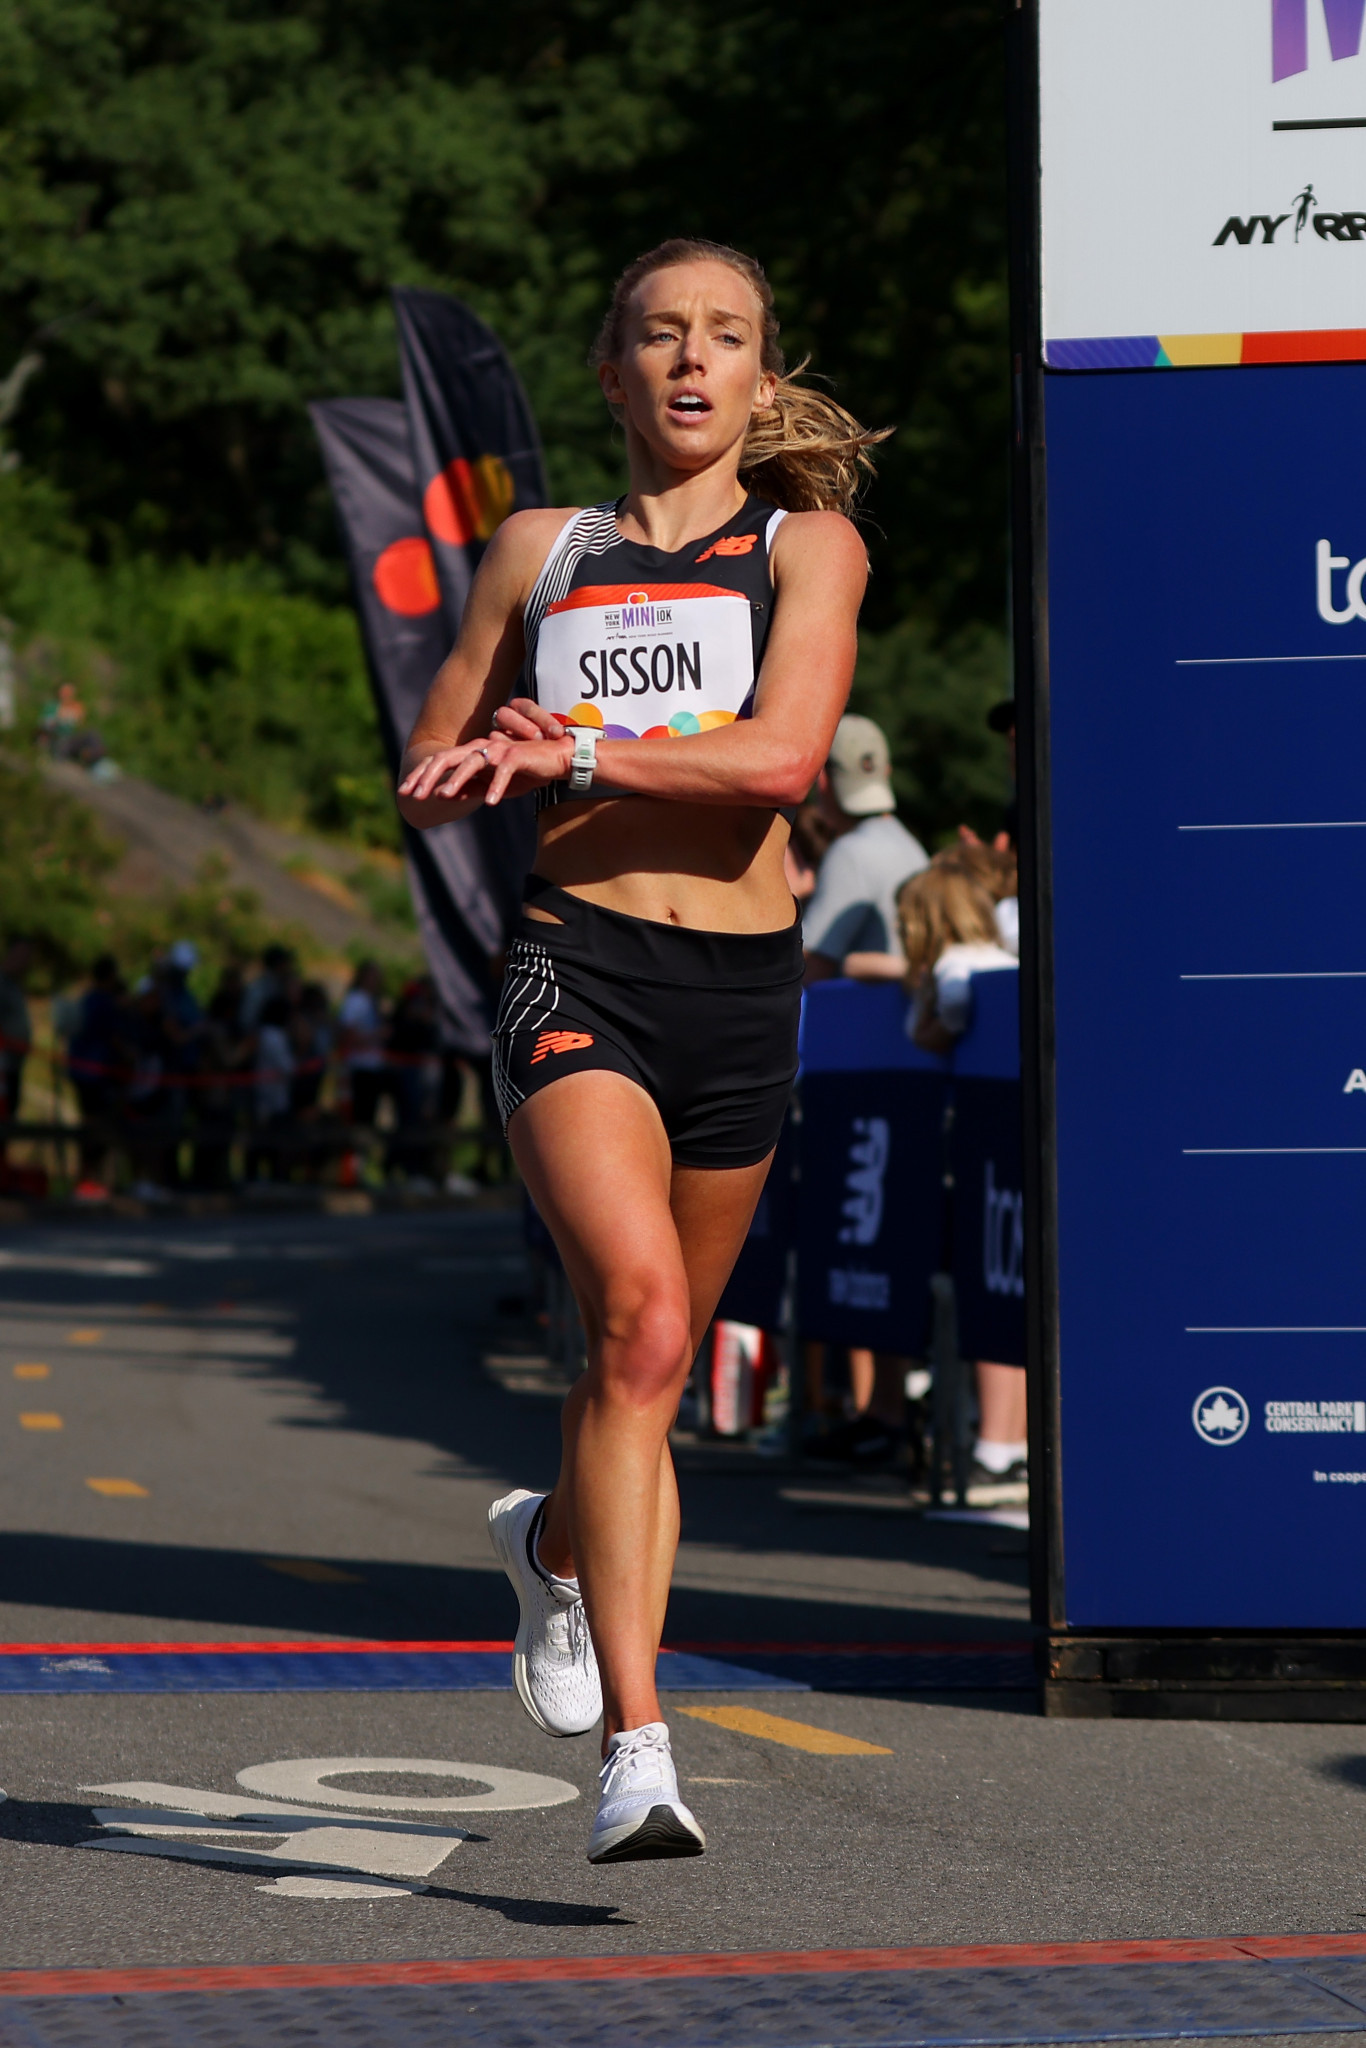 Last year's runner-up Emily Sisson is among the  US entries for the women's elite race at the Chicago Marathon ©Getty Images